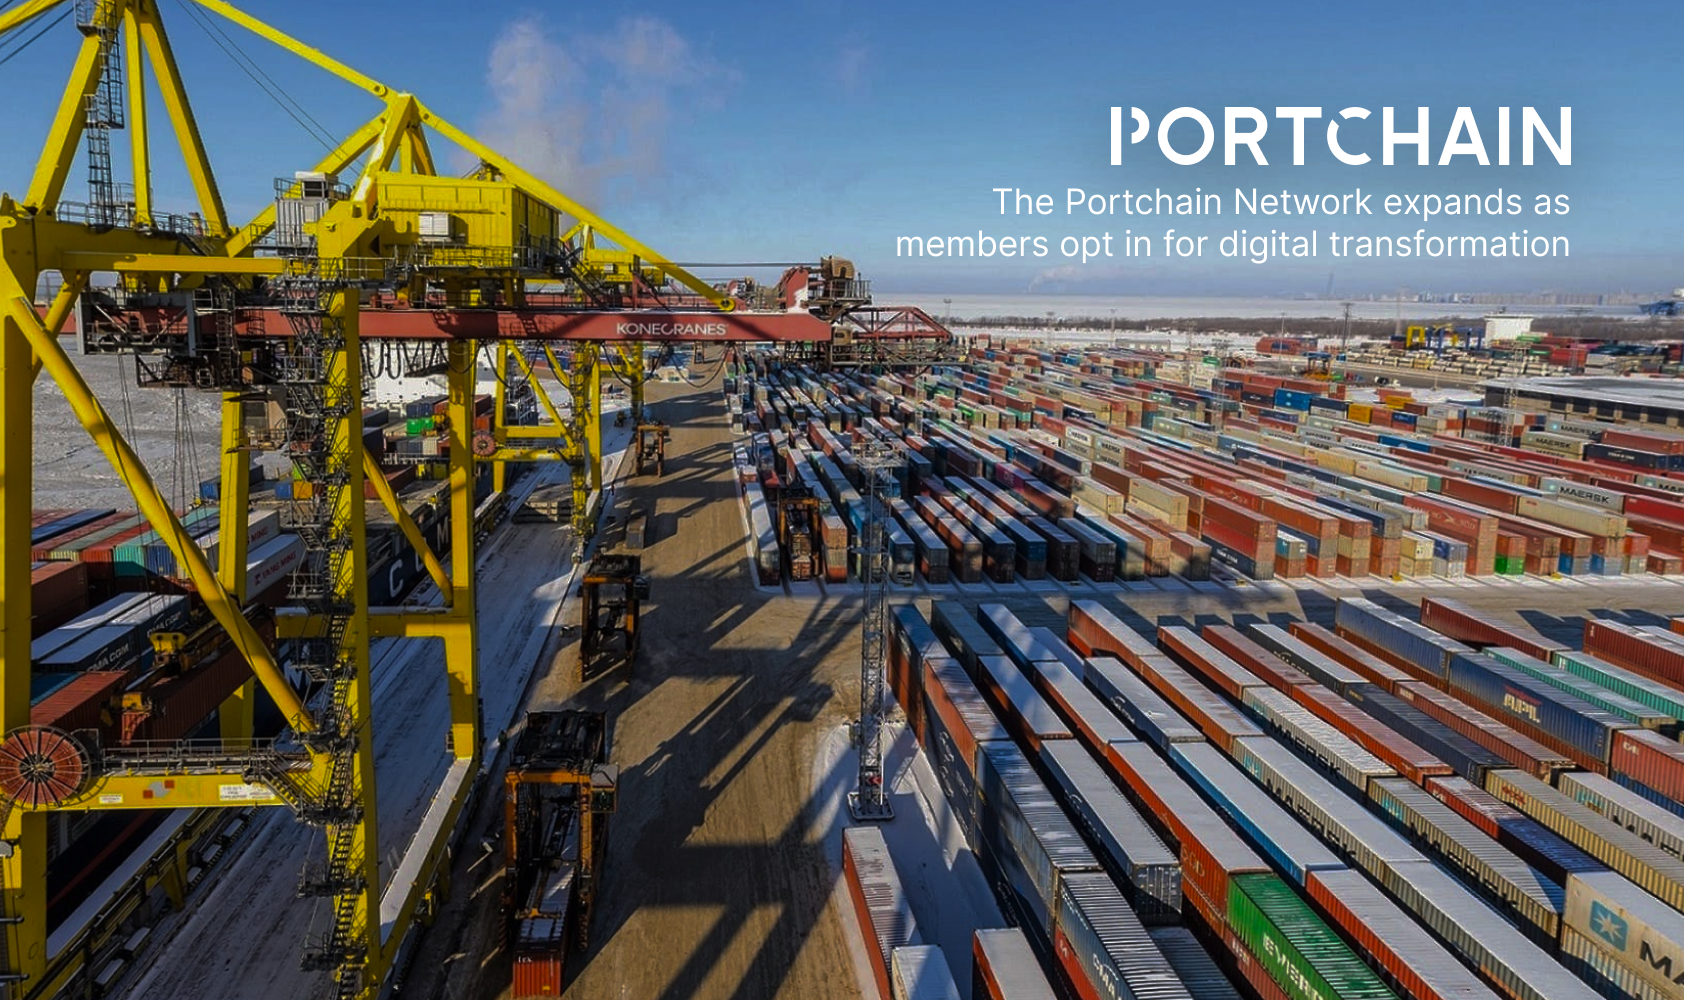 The Portchain Network expands as members opt in for digital transformation